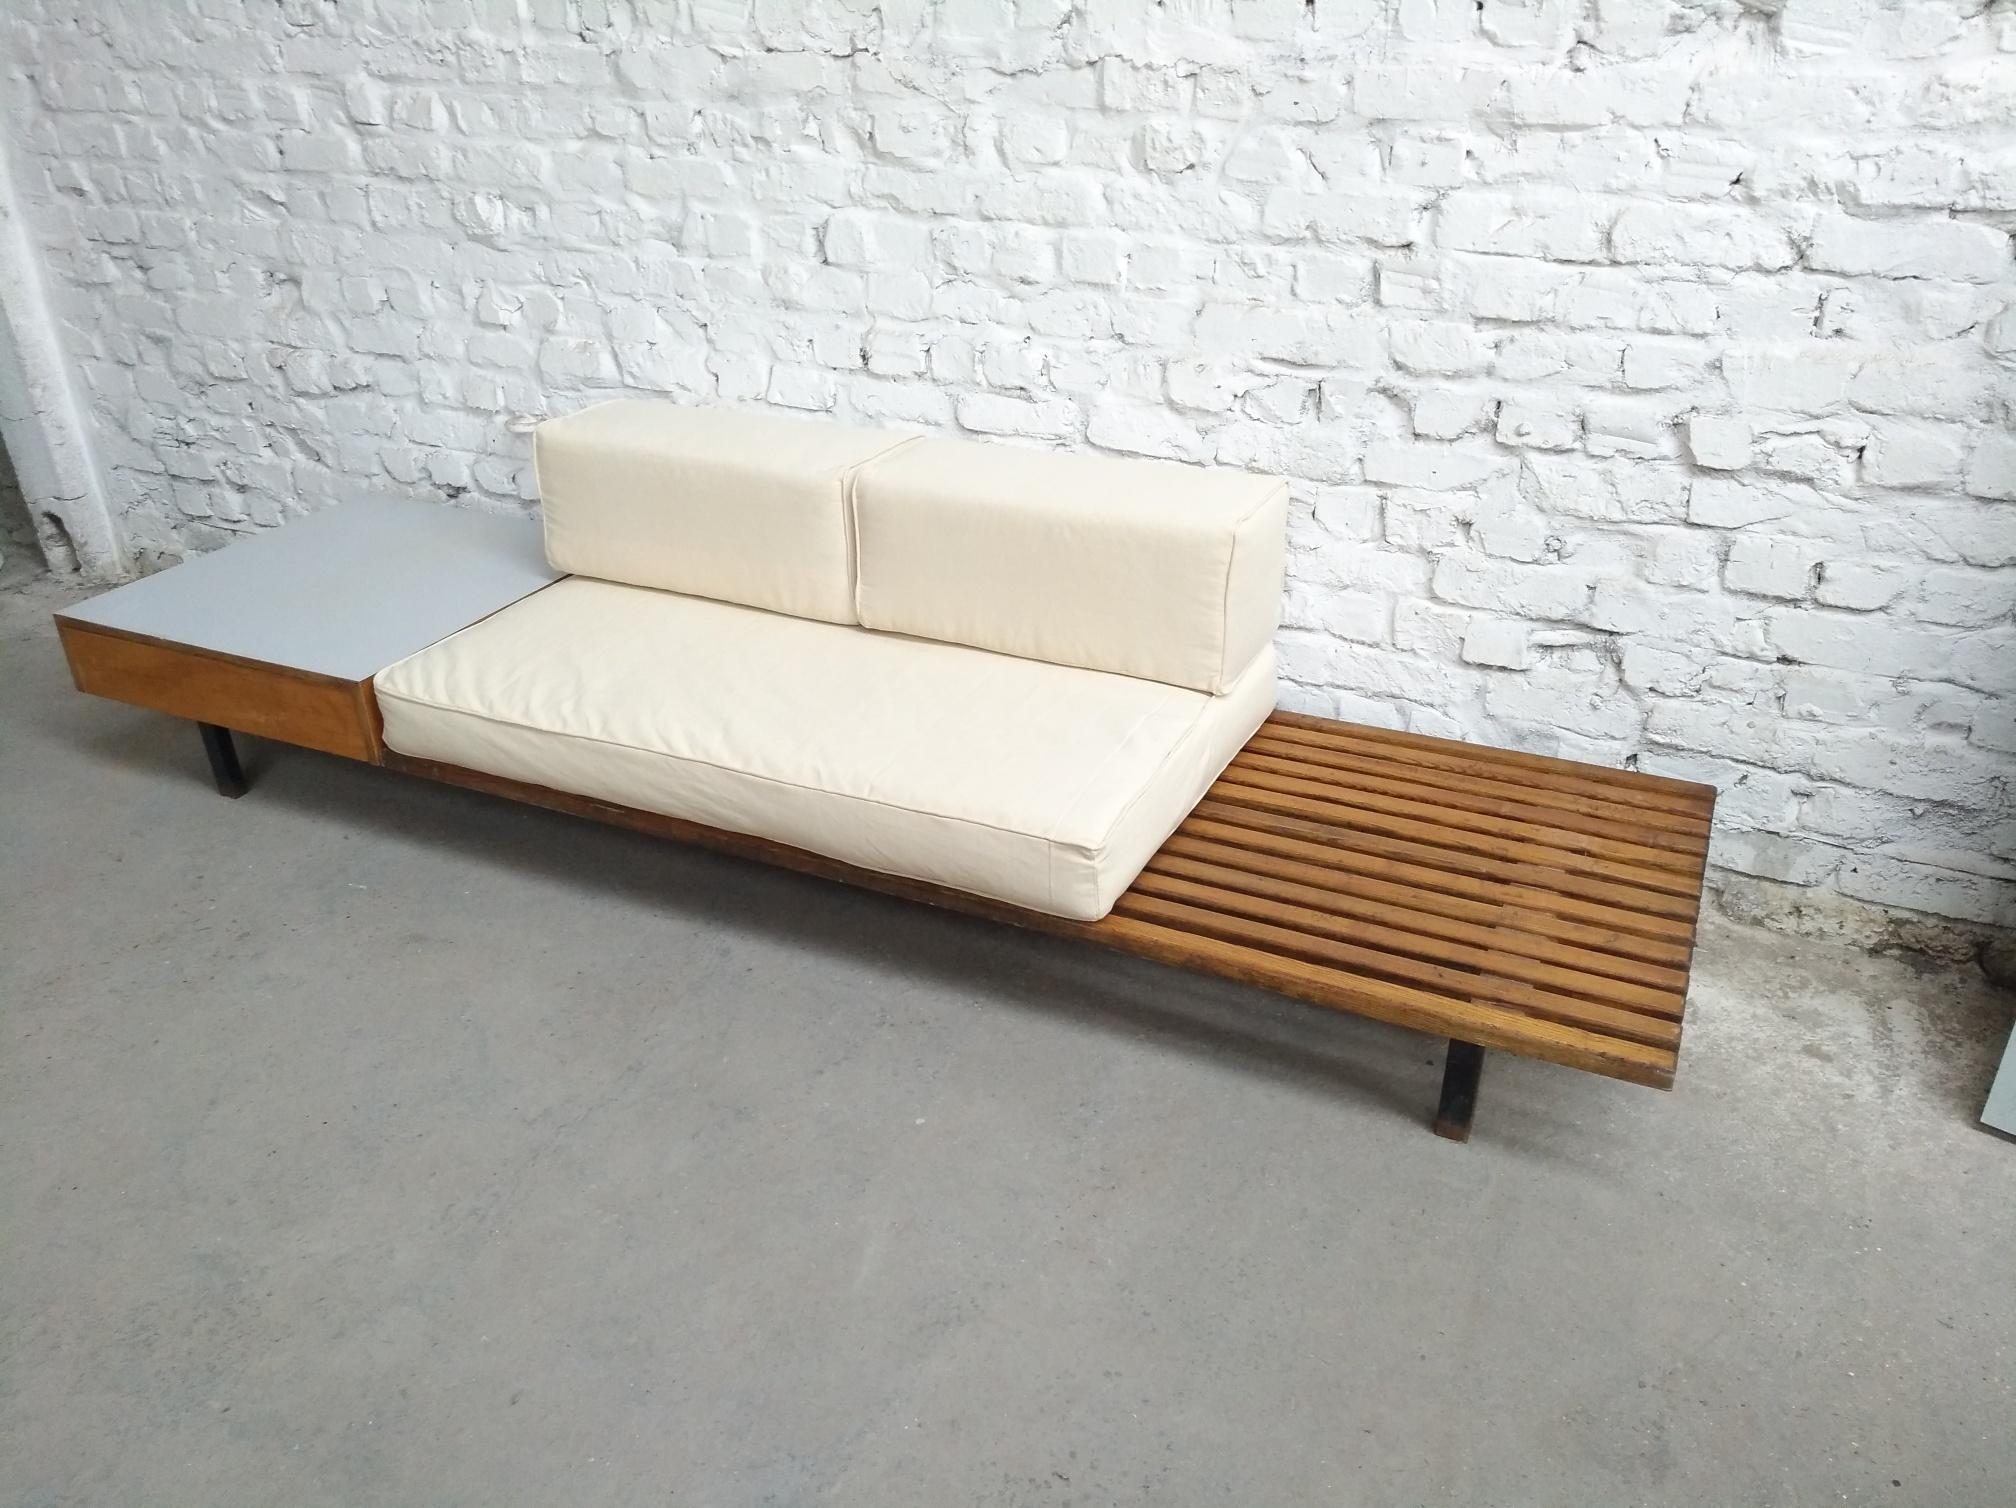 Charlotte Perriand Cansado bench daybed Steph Simon France 1959 For Sale 2